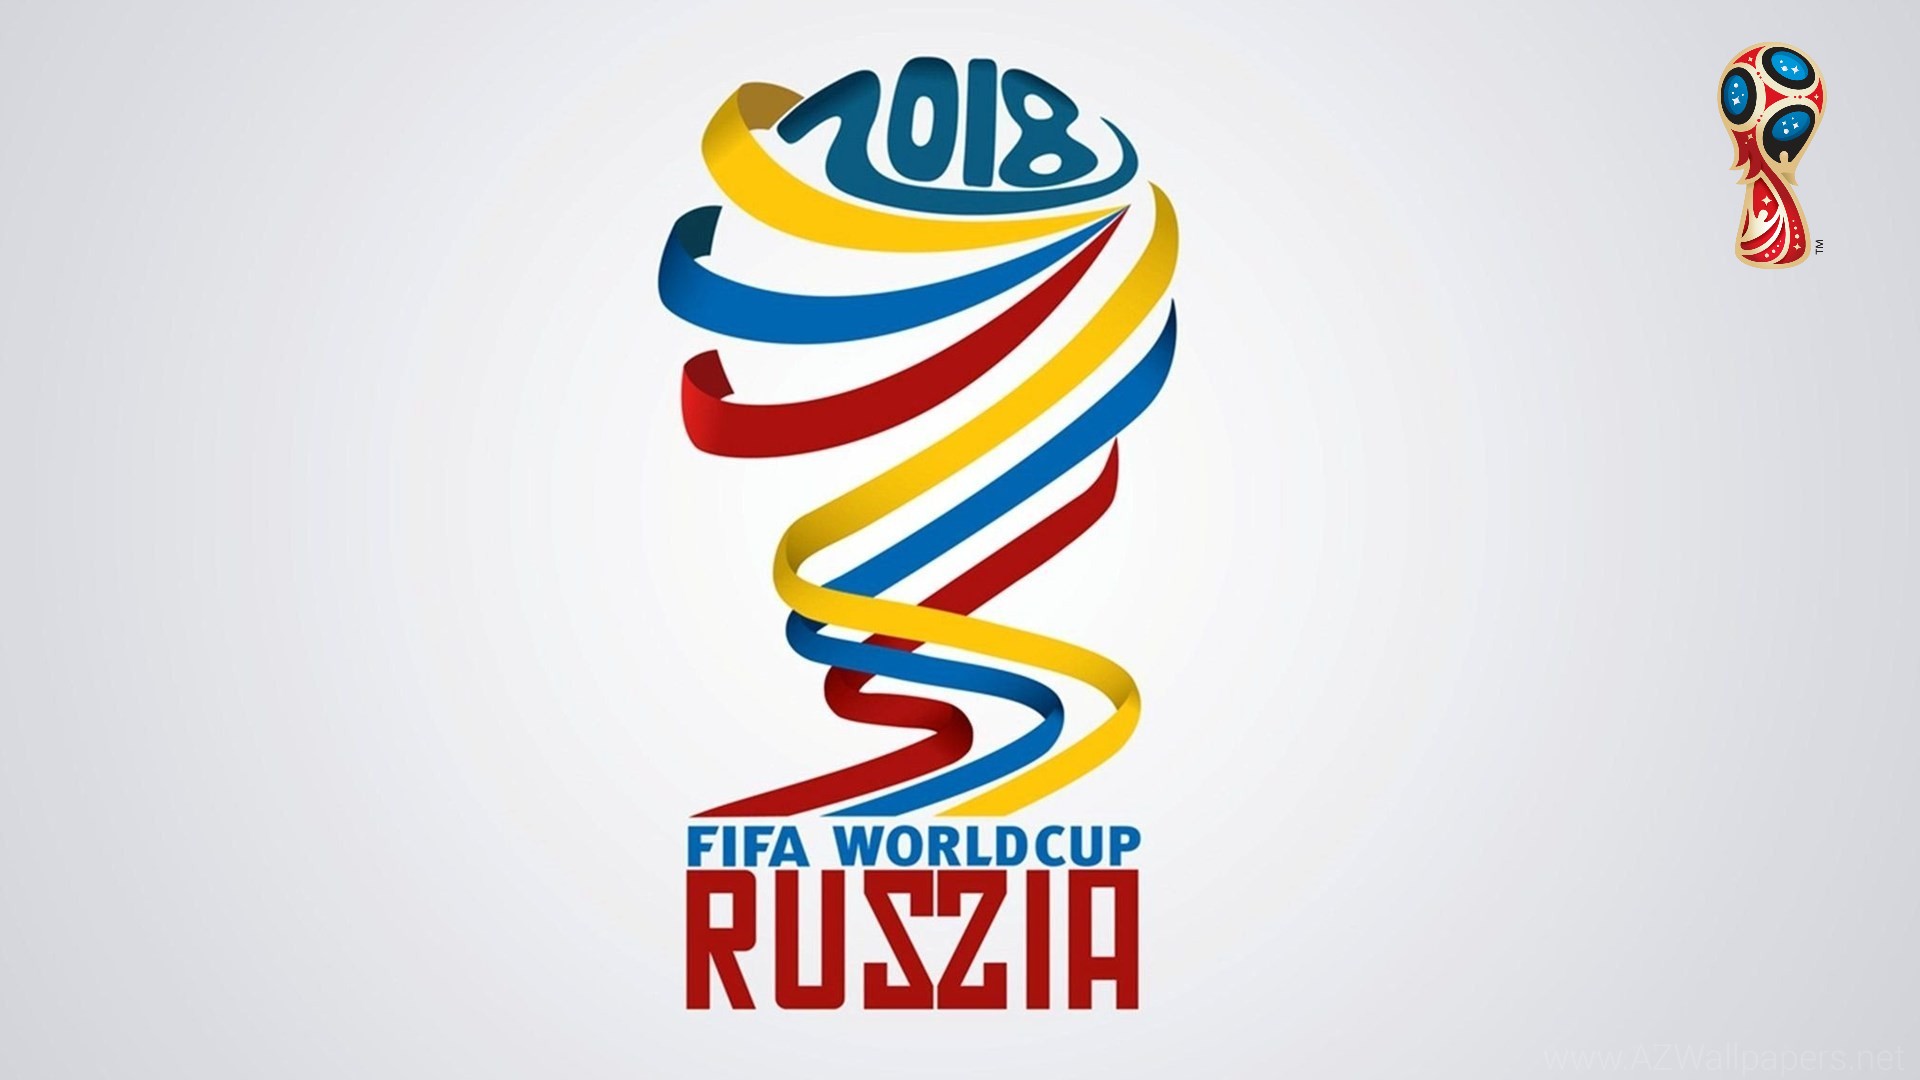 2018 World Cup Wallpaper HD with resolution 1920x1080 pixel. You can make this wallpaper for your Mac or Windows Desktop Background, iPhone, Android or Tablet and another Smartphone device